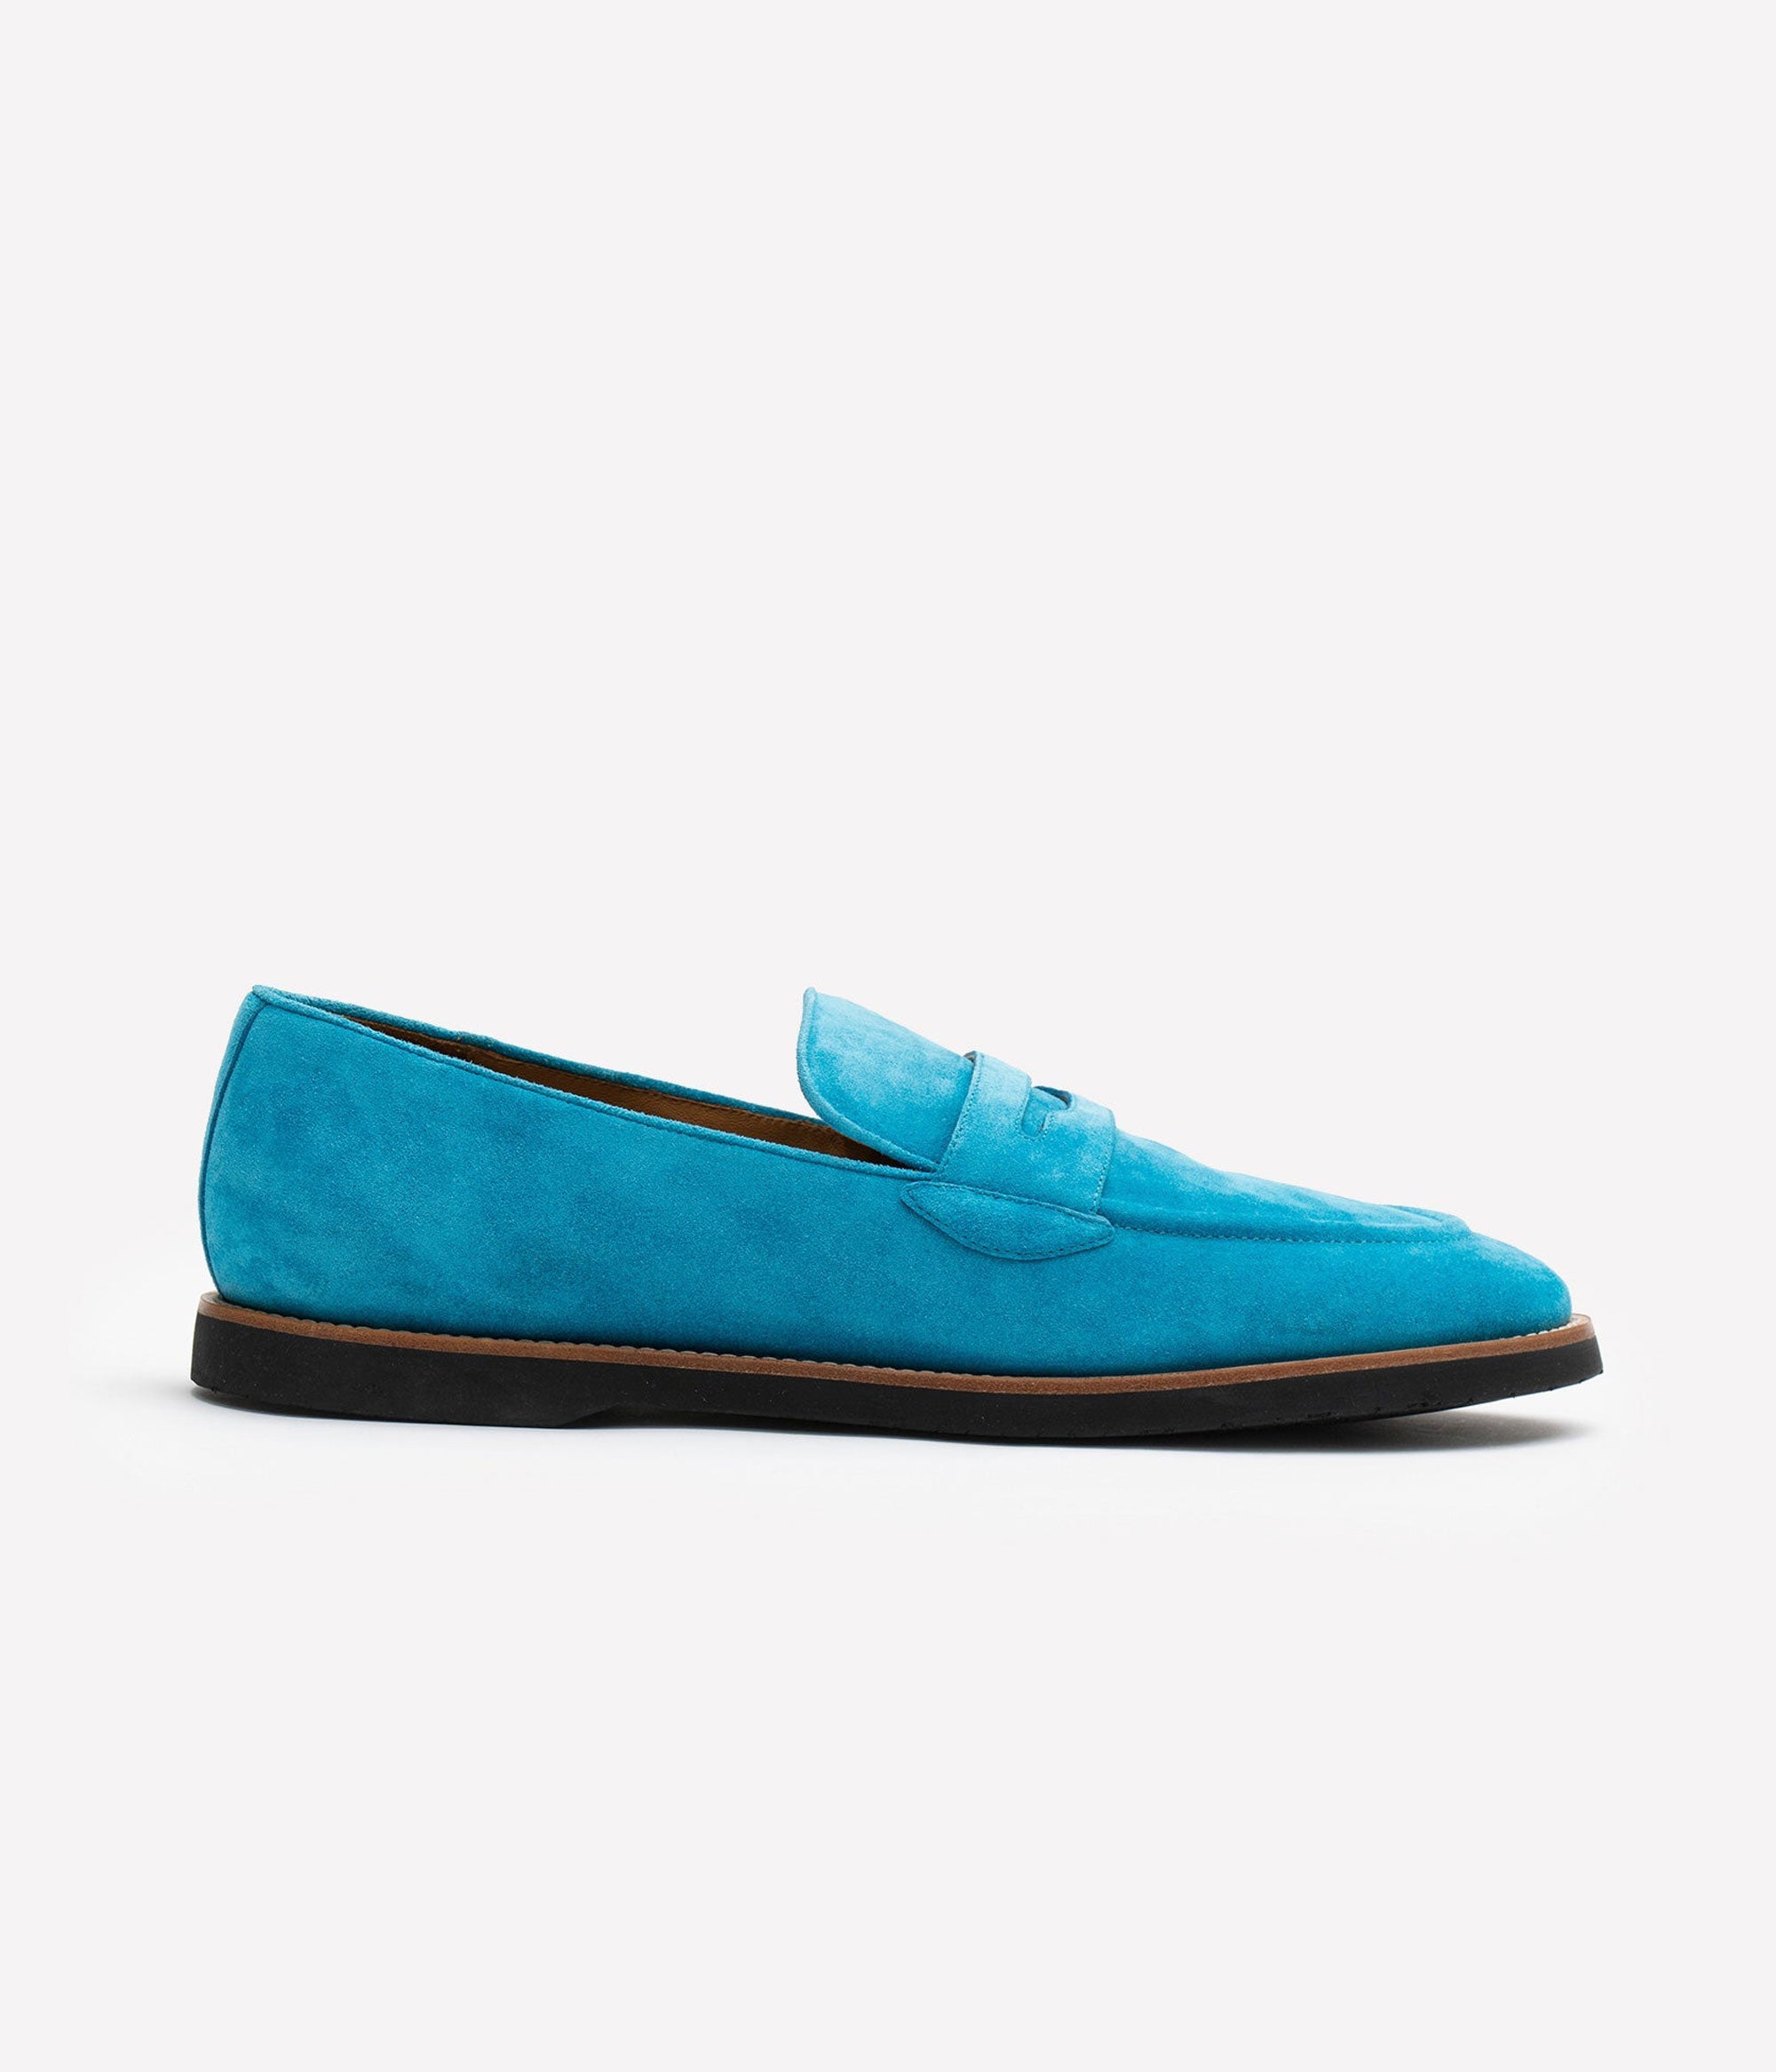 HUMAN RECREATIONAL SERVICES DEL REY TURQUOISE PENNY LOAFER IN ITALIAN SUEDE 